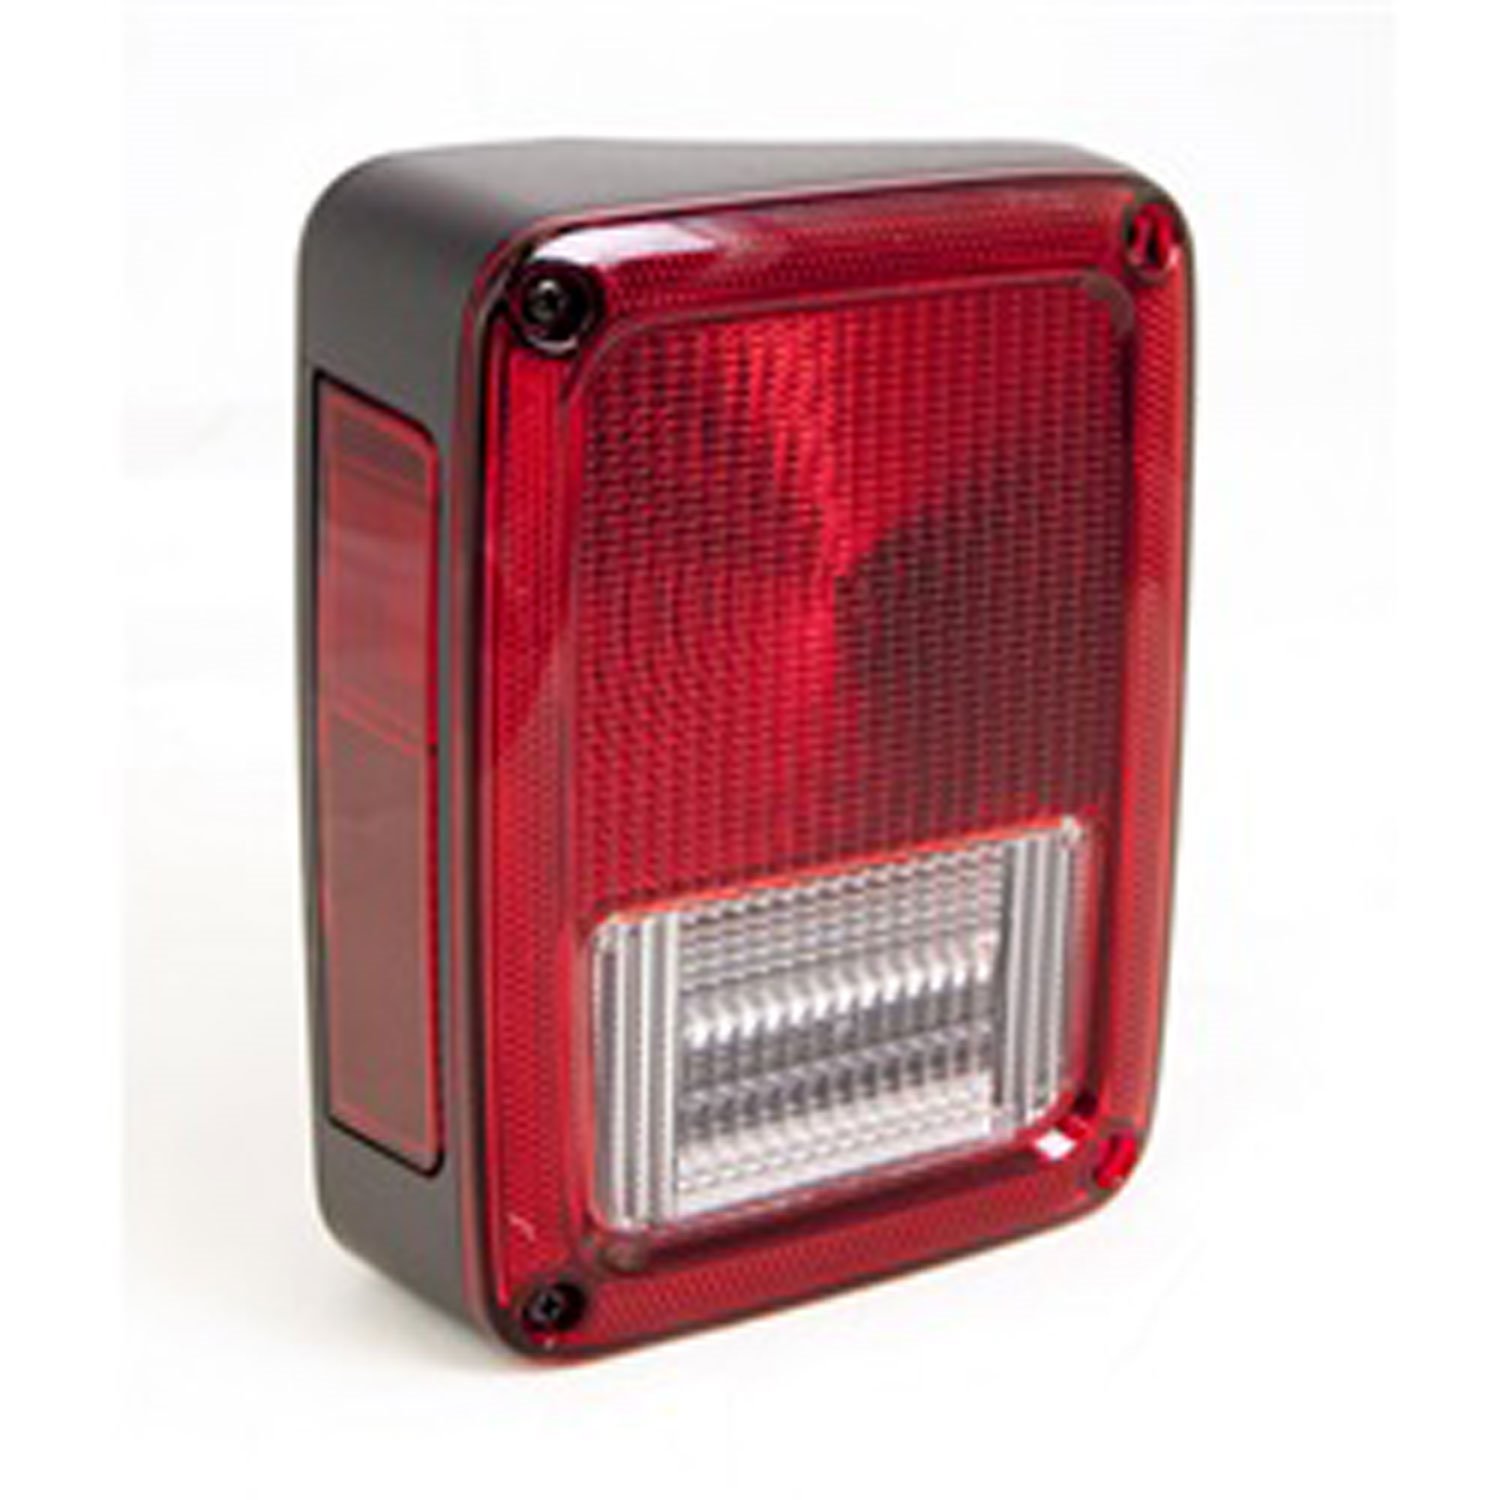 Replacement tail light assembly from Omix-ADA, Fits left side of 07-16 Jeep Wrangler JK